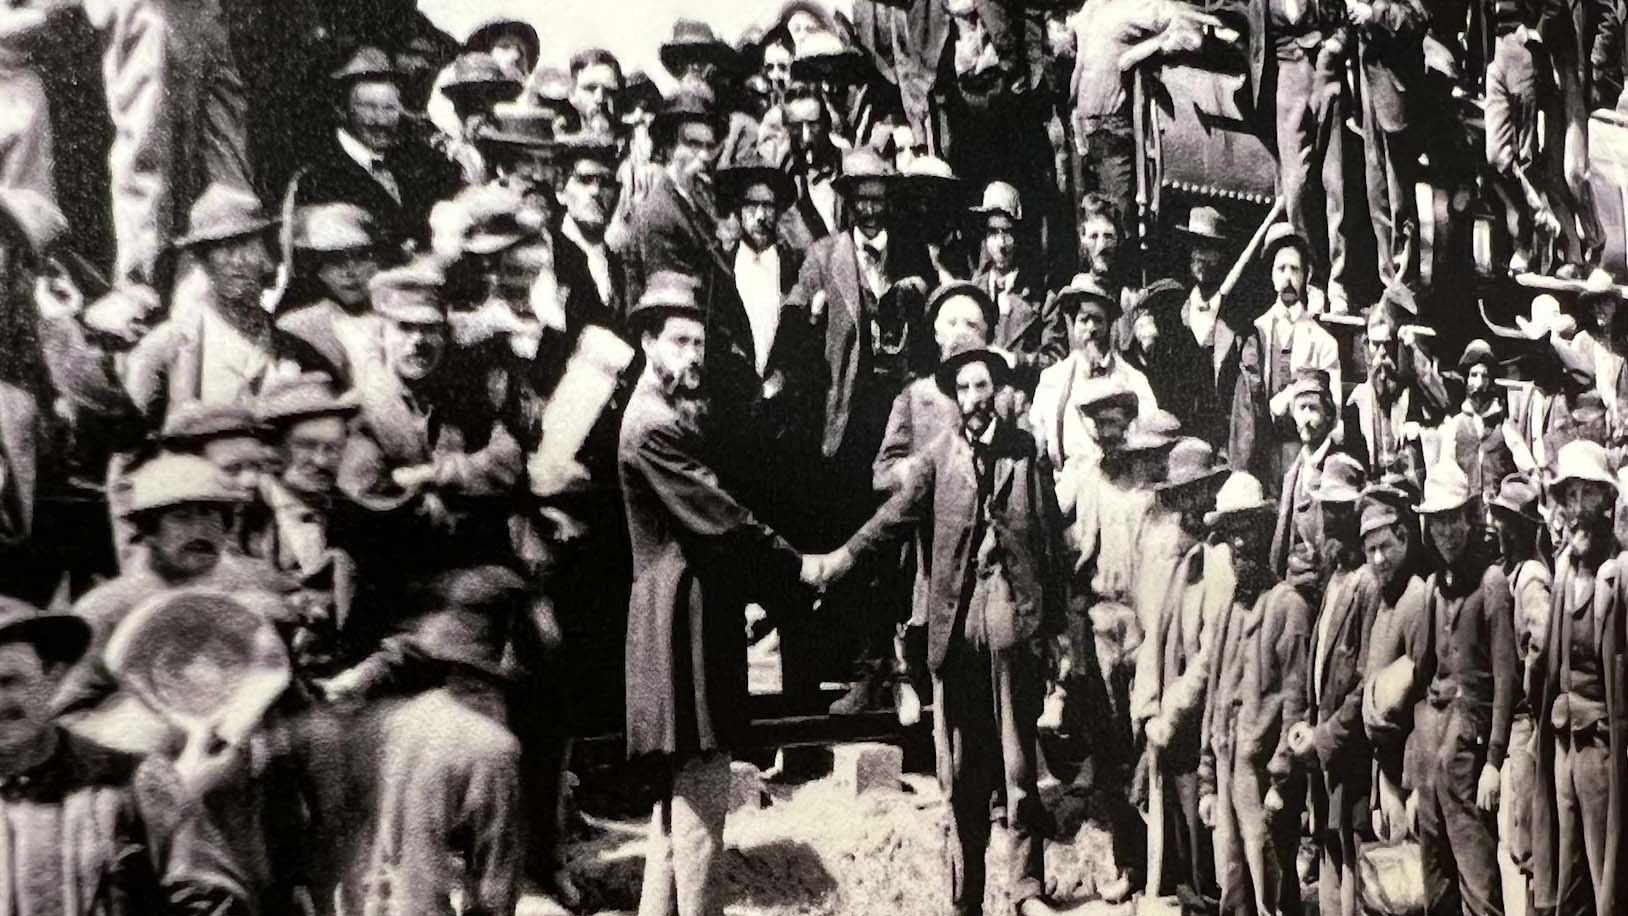 A historic, black and white photo of people shaking hands in front of a crowd at the completion of the Transcontinental Railroad.